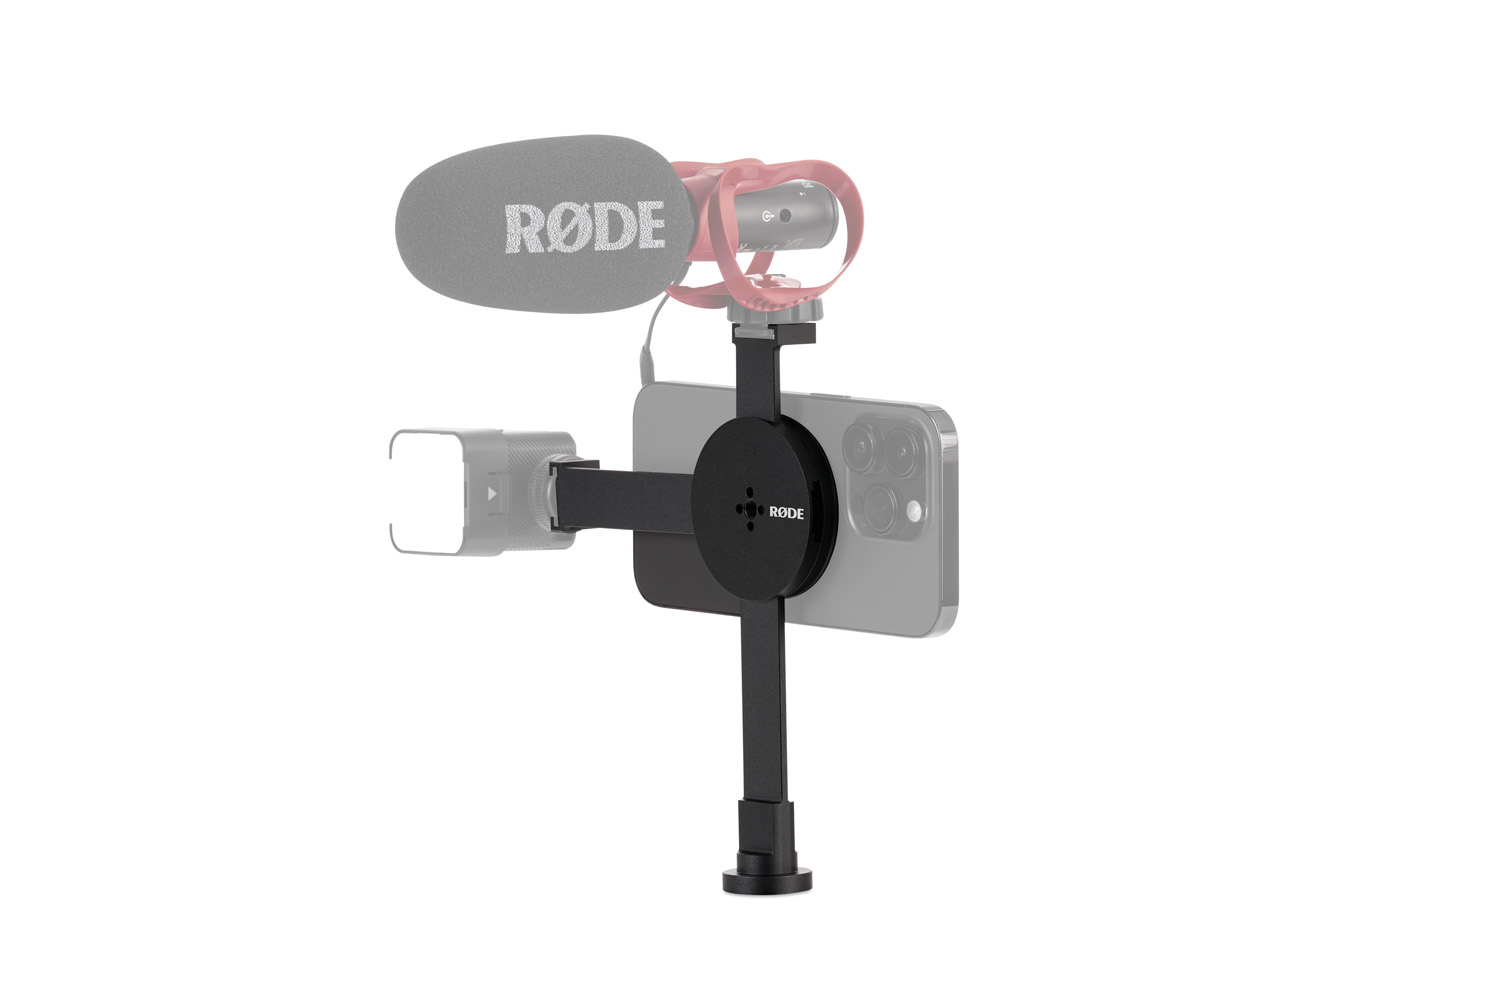 A conceptual image of a RØDE smartphone adapter mounted on an iPhone, with a microphone and other accessories attached, greyed out to focus on the adapter's design